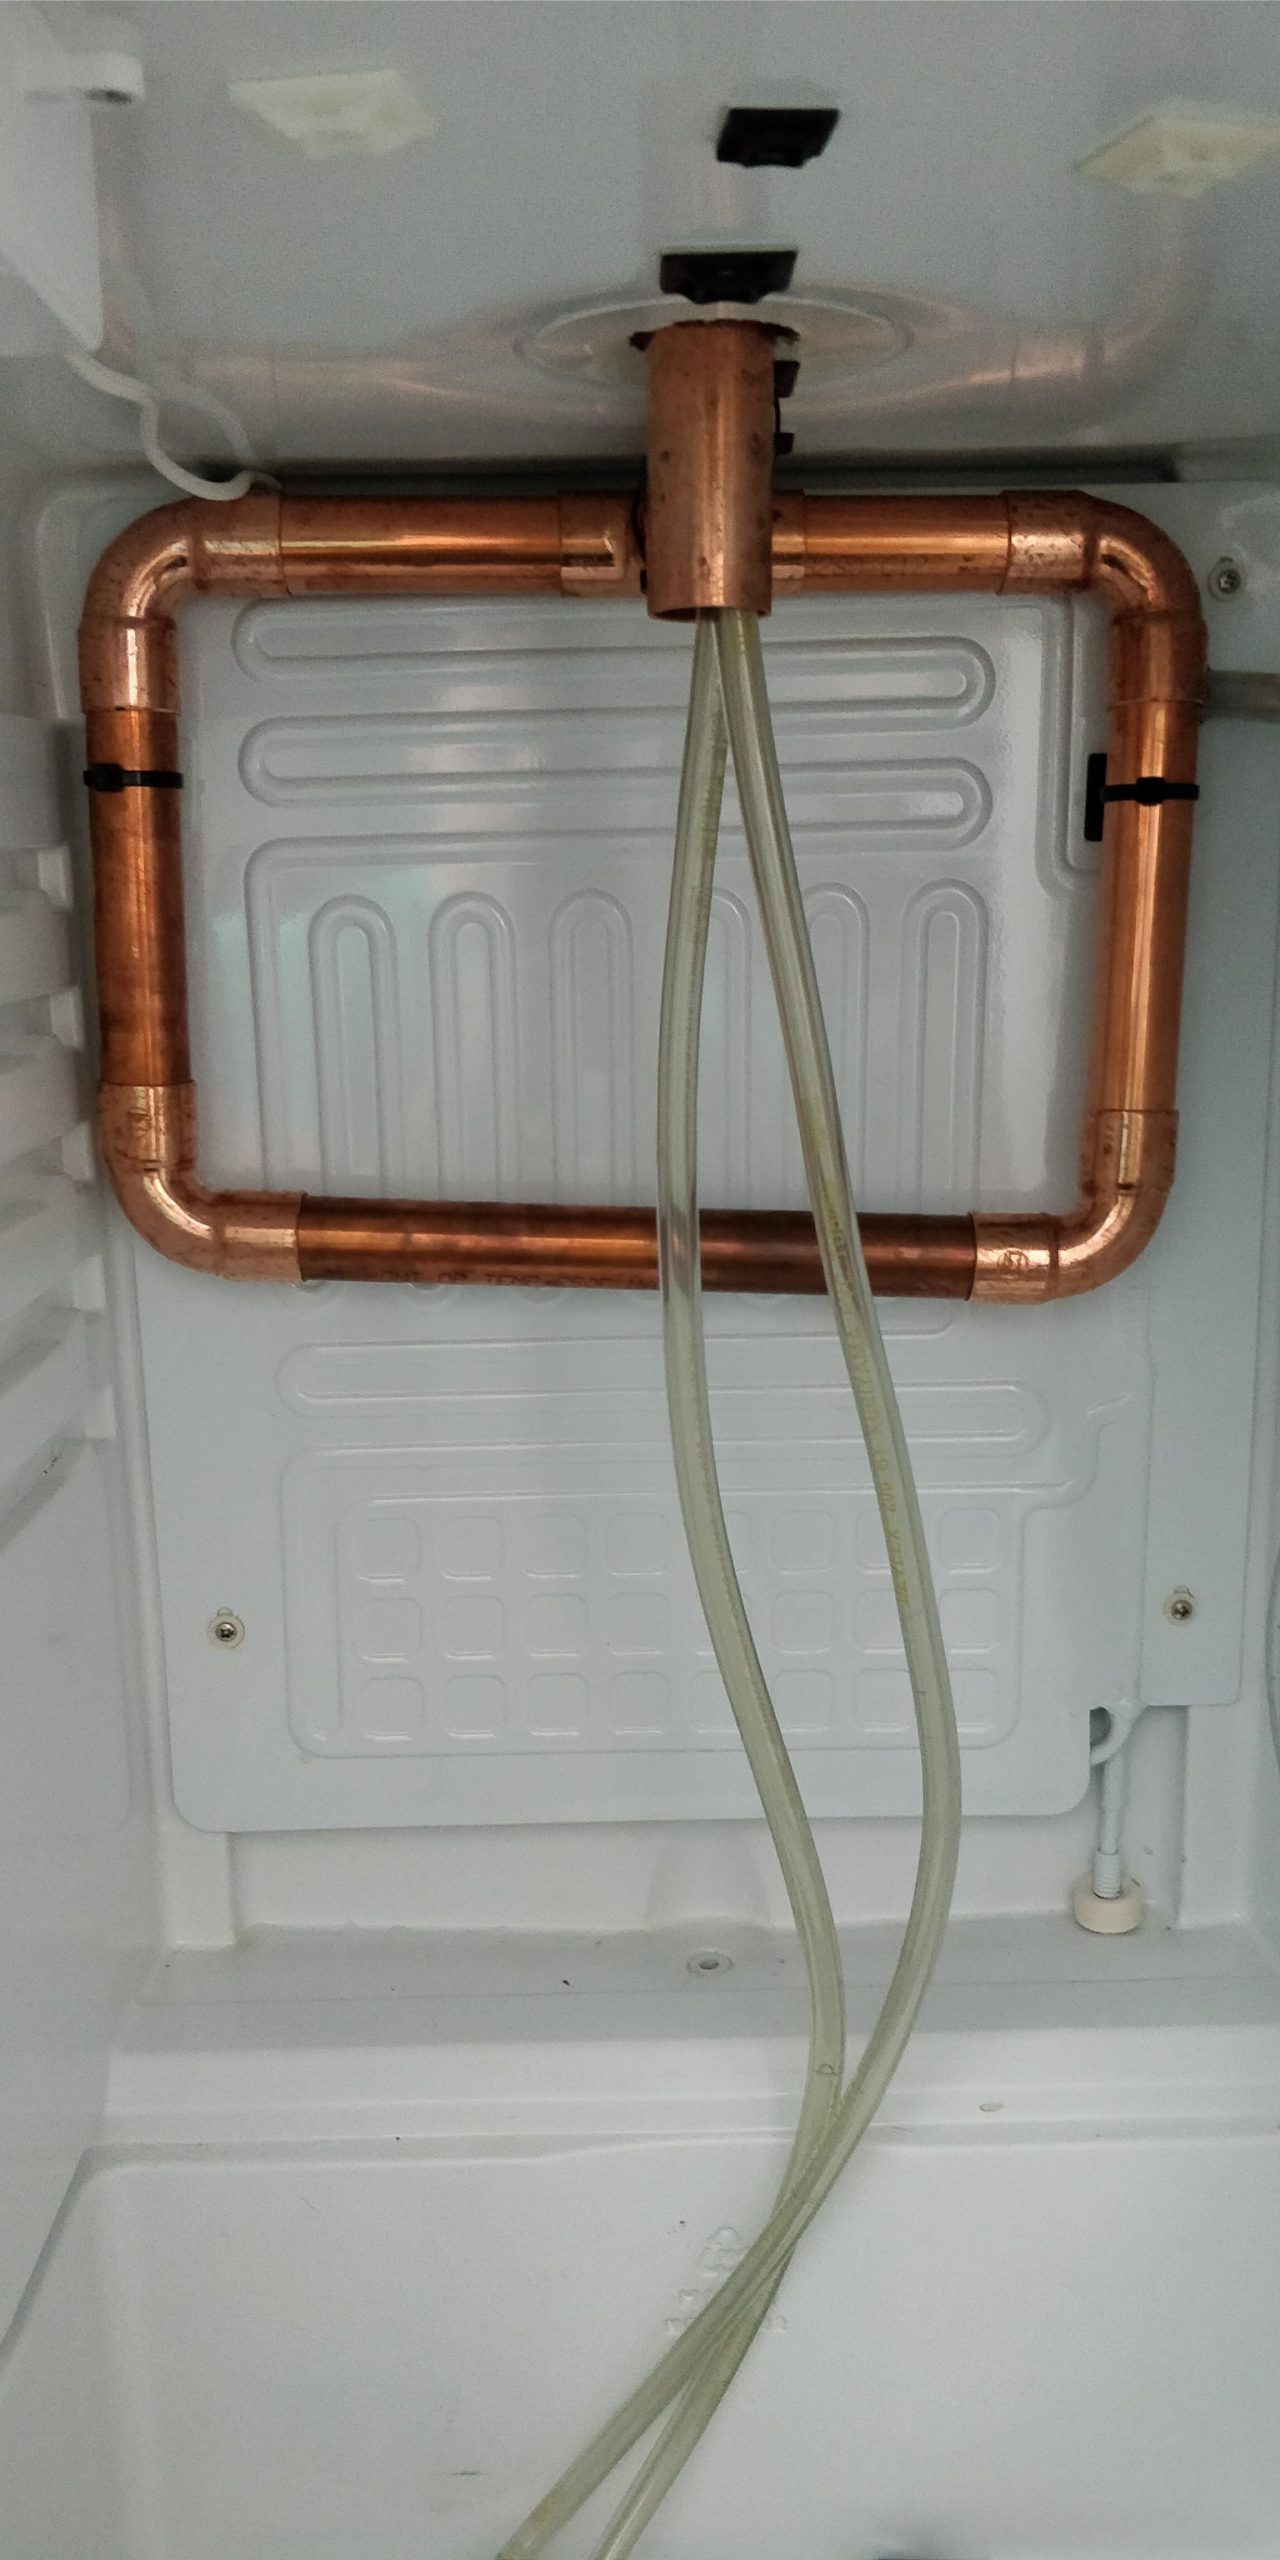 Kegerator Copper Heat Sink This Is To Cool The Kegerator in size 2304 X 4608